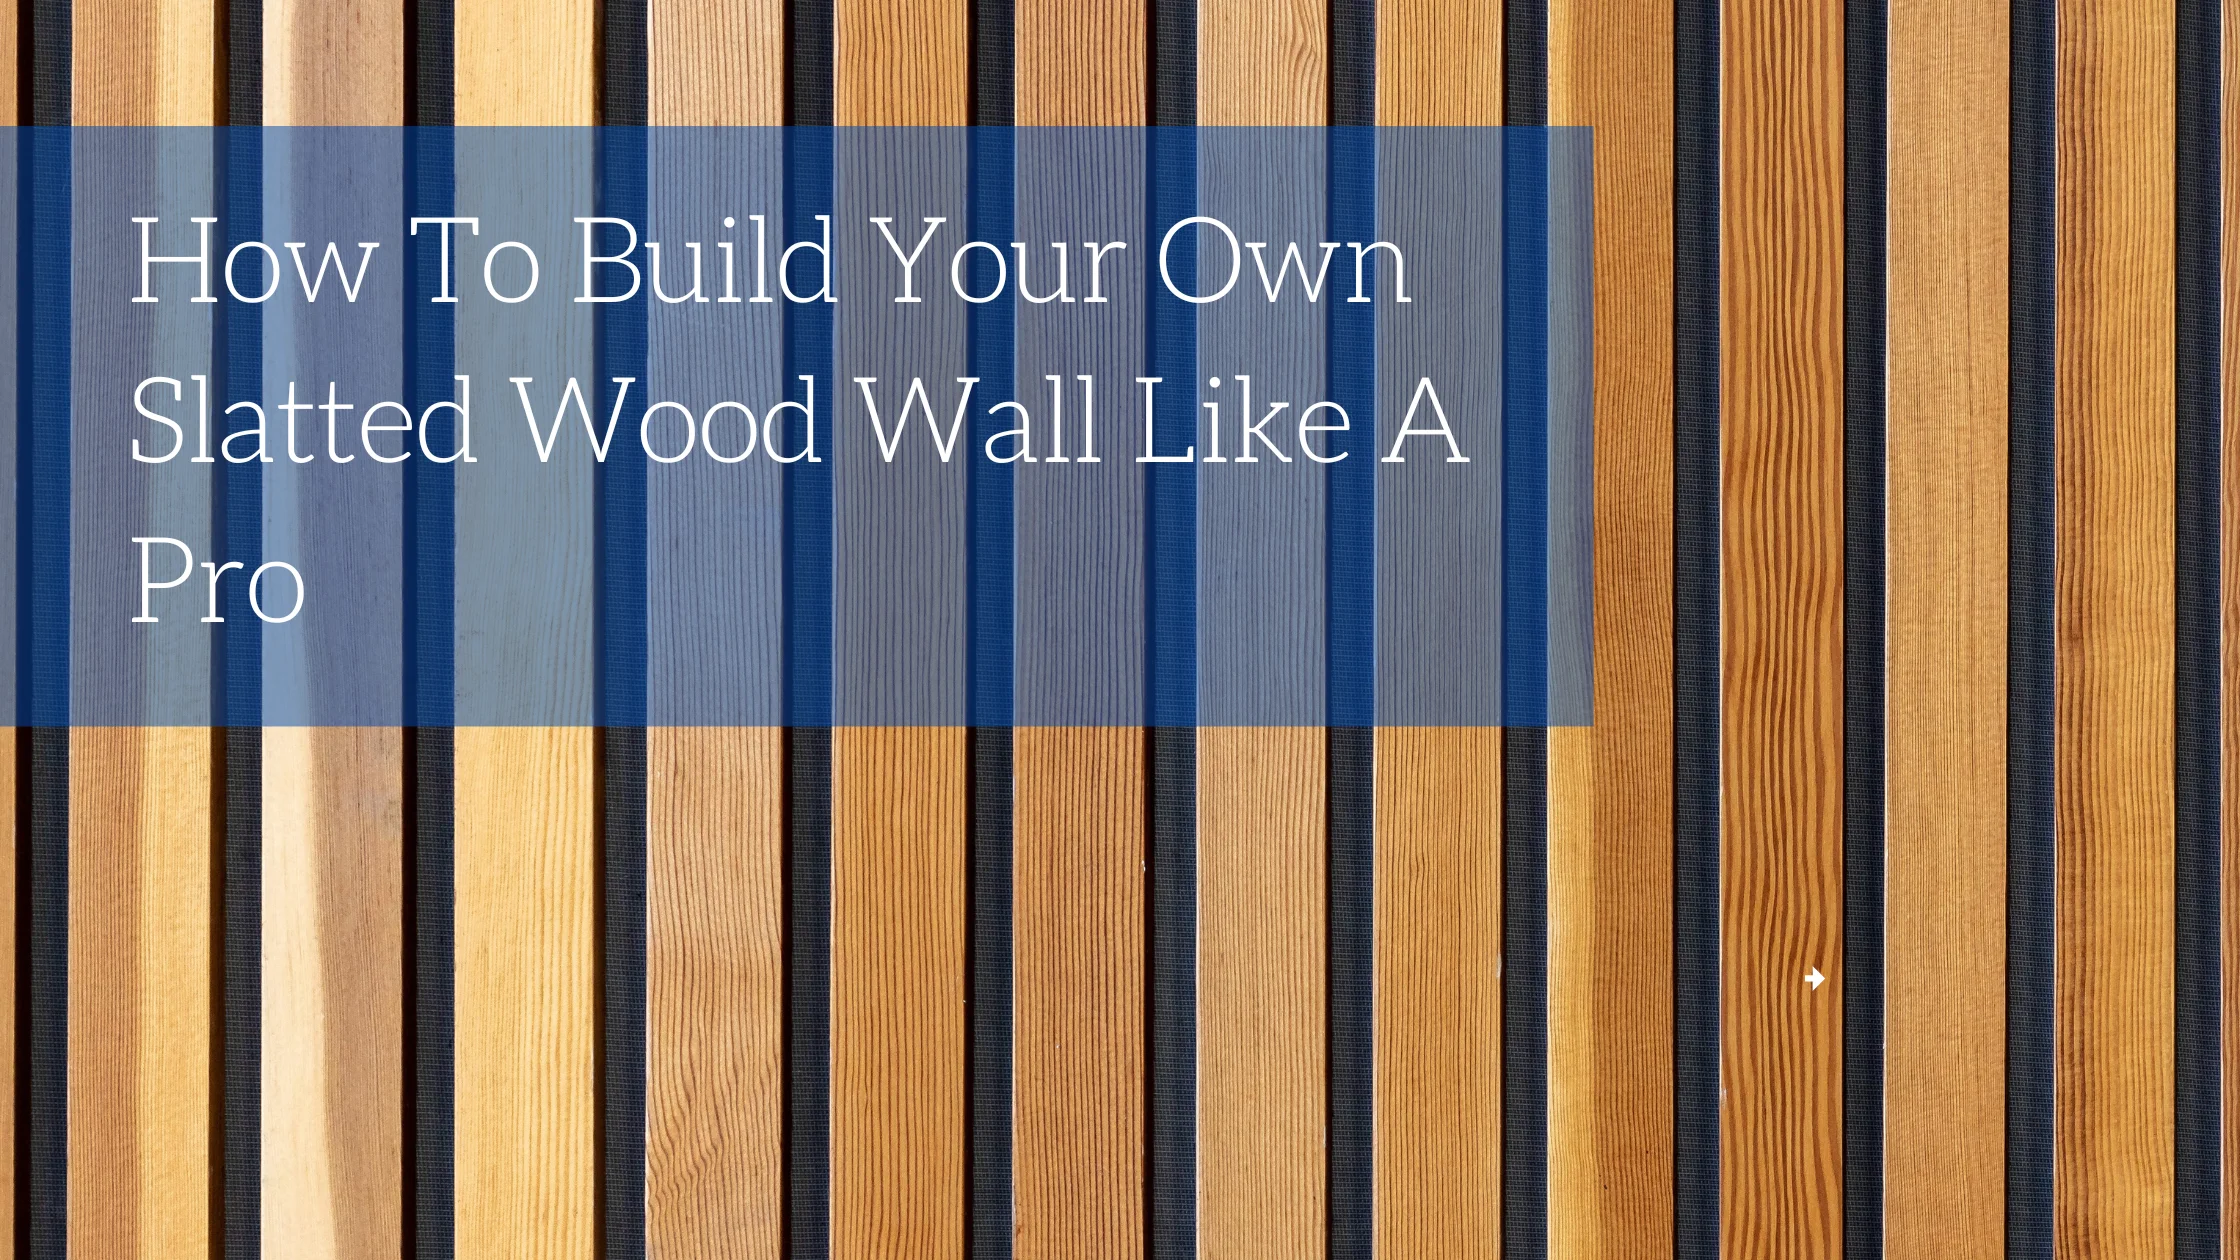 How To Build Your Own Slatted Wood Wall Like A Pro